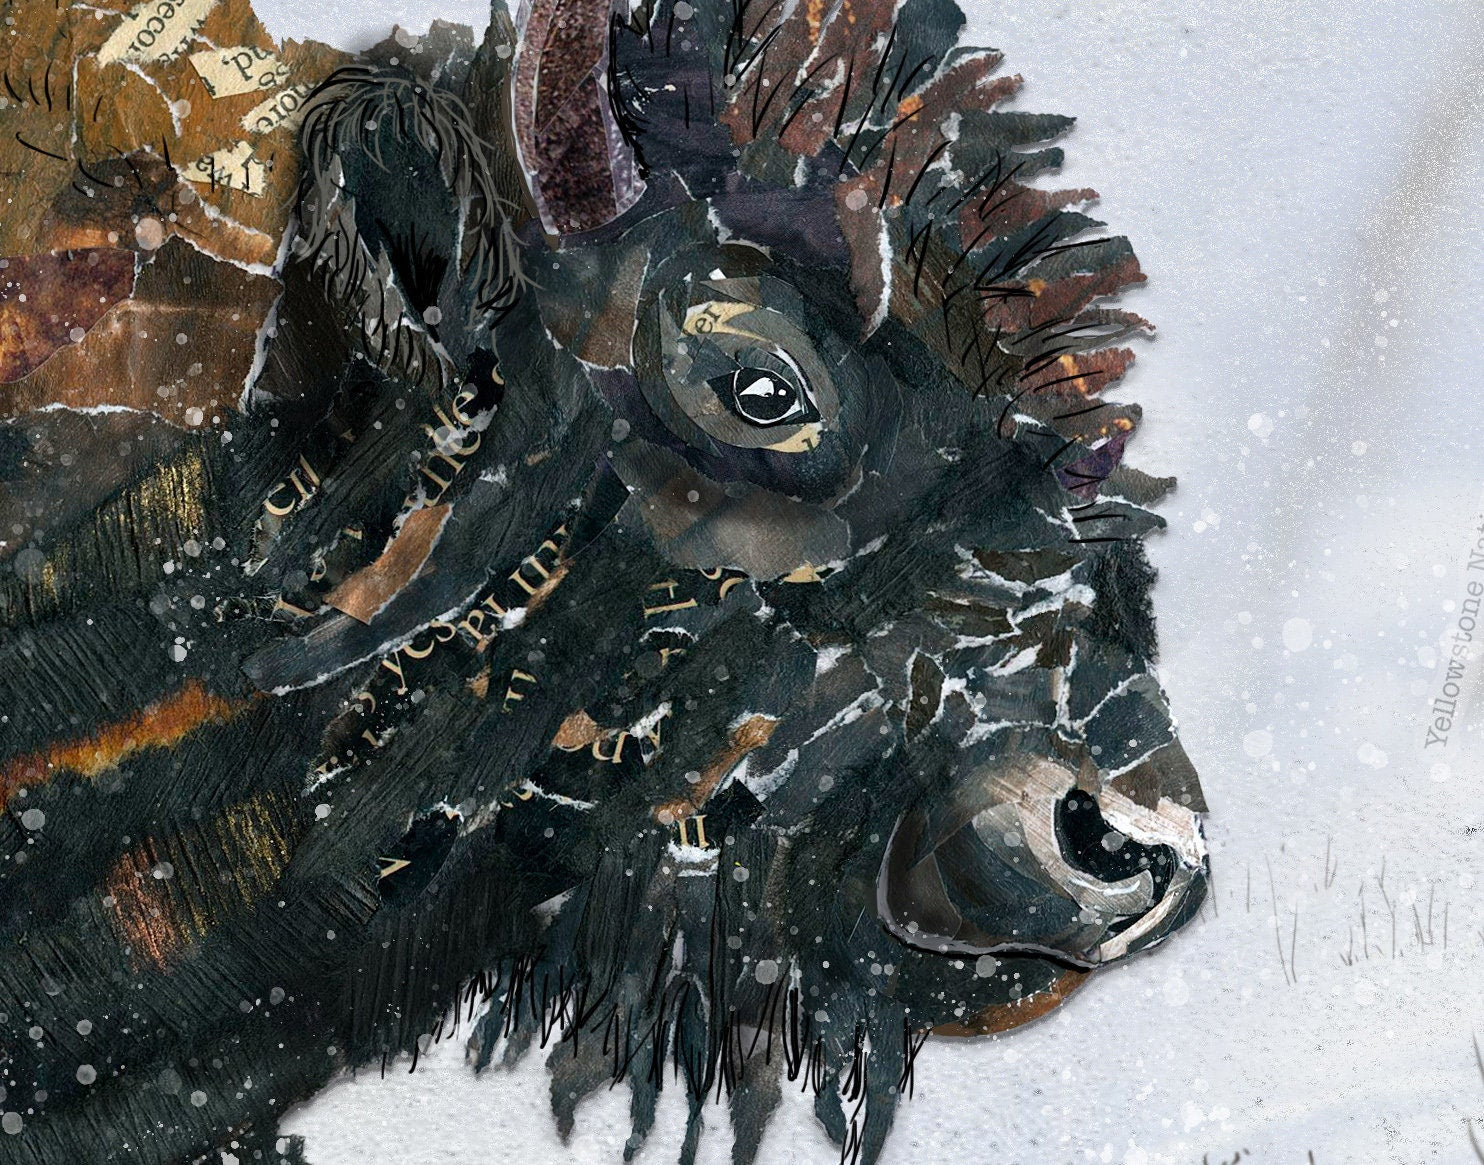 8x10 Art Print of a mixed media collage of a bison in the snow with an elk and gopher, Yellowstone